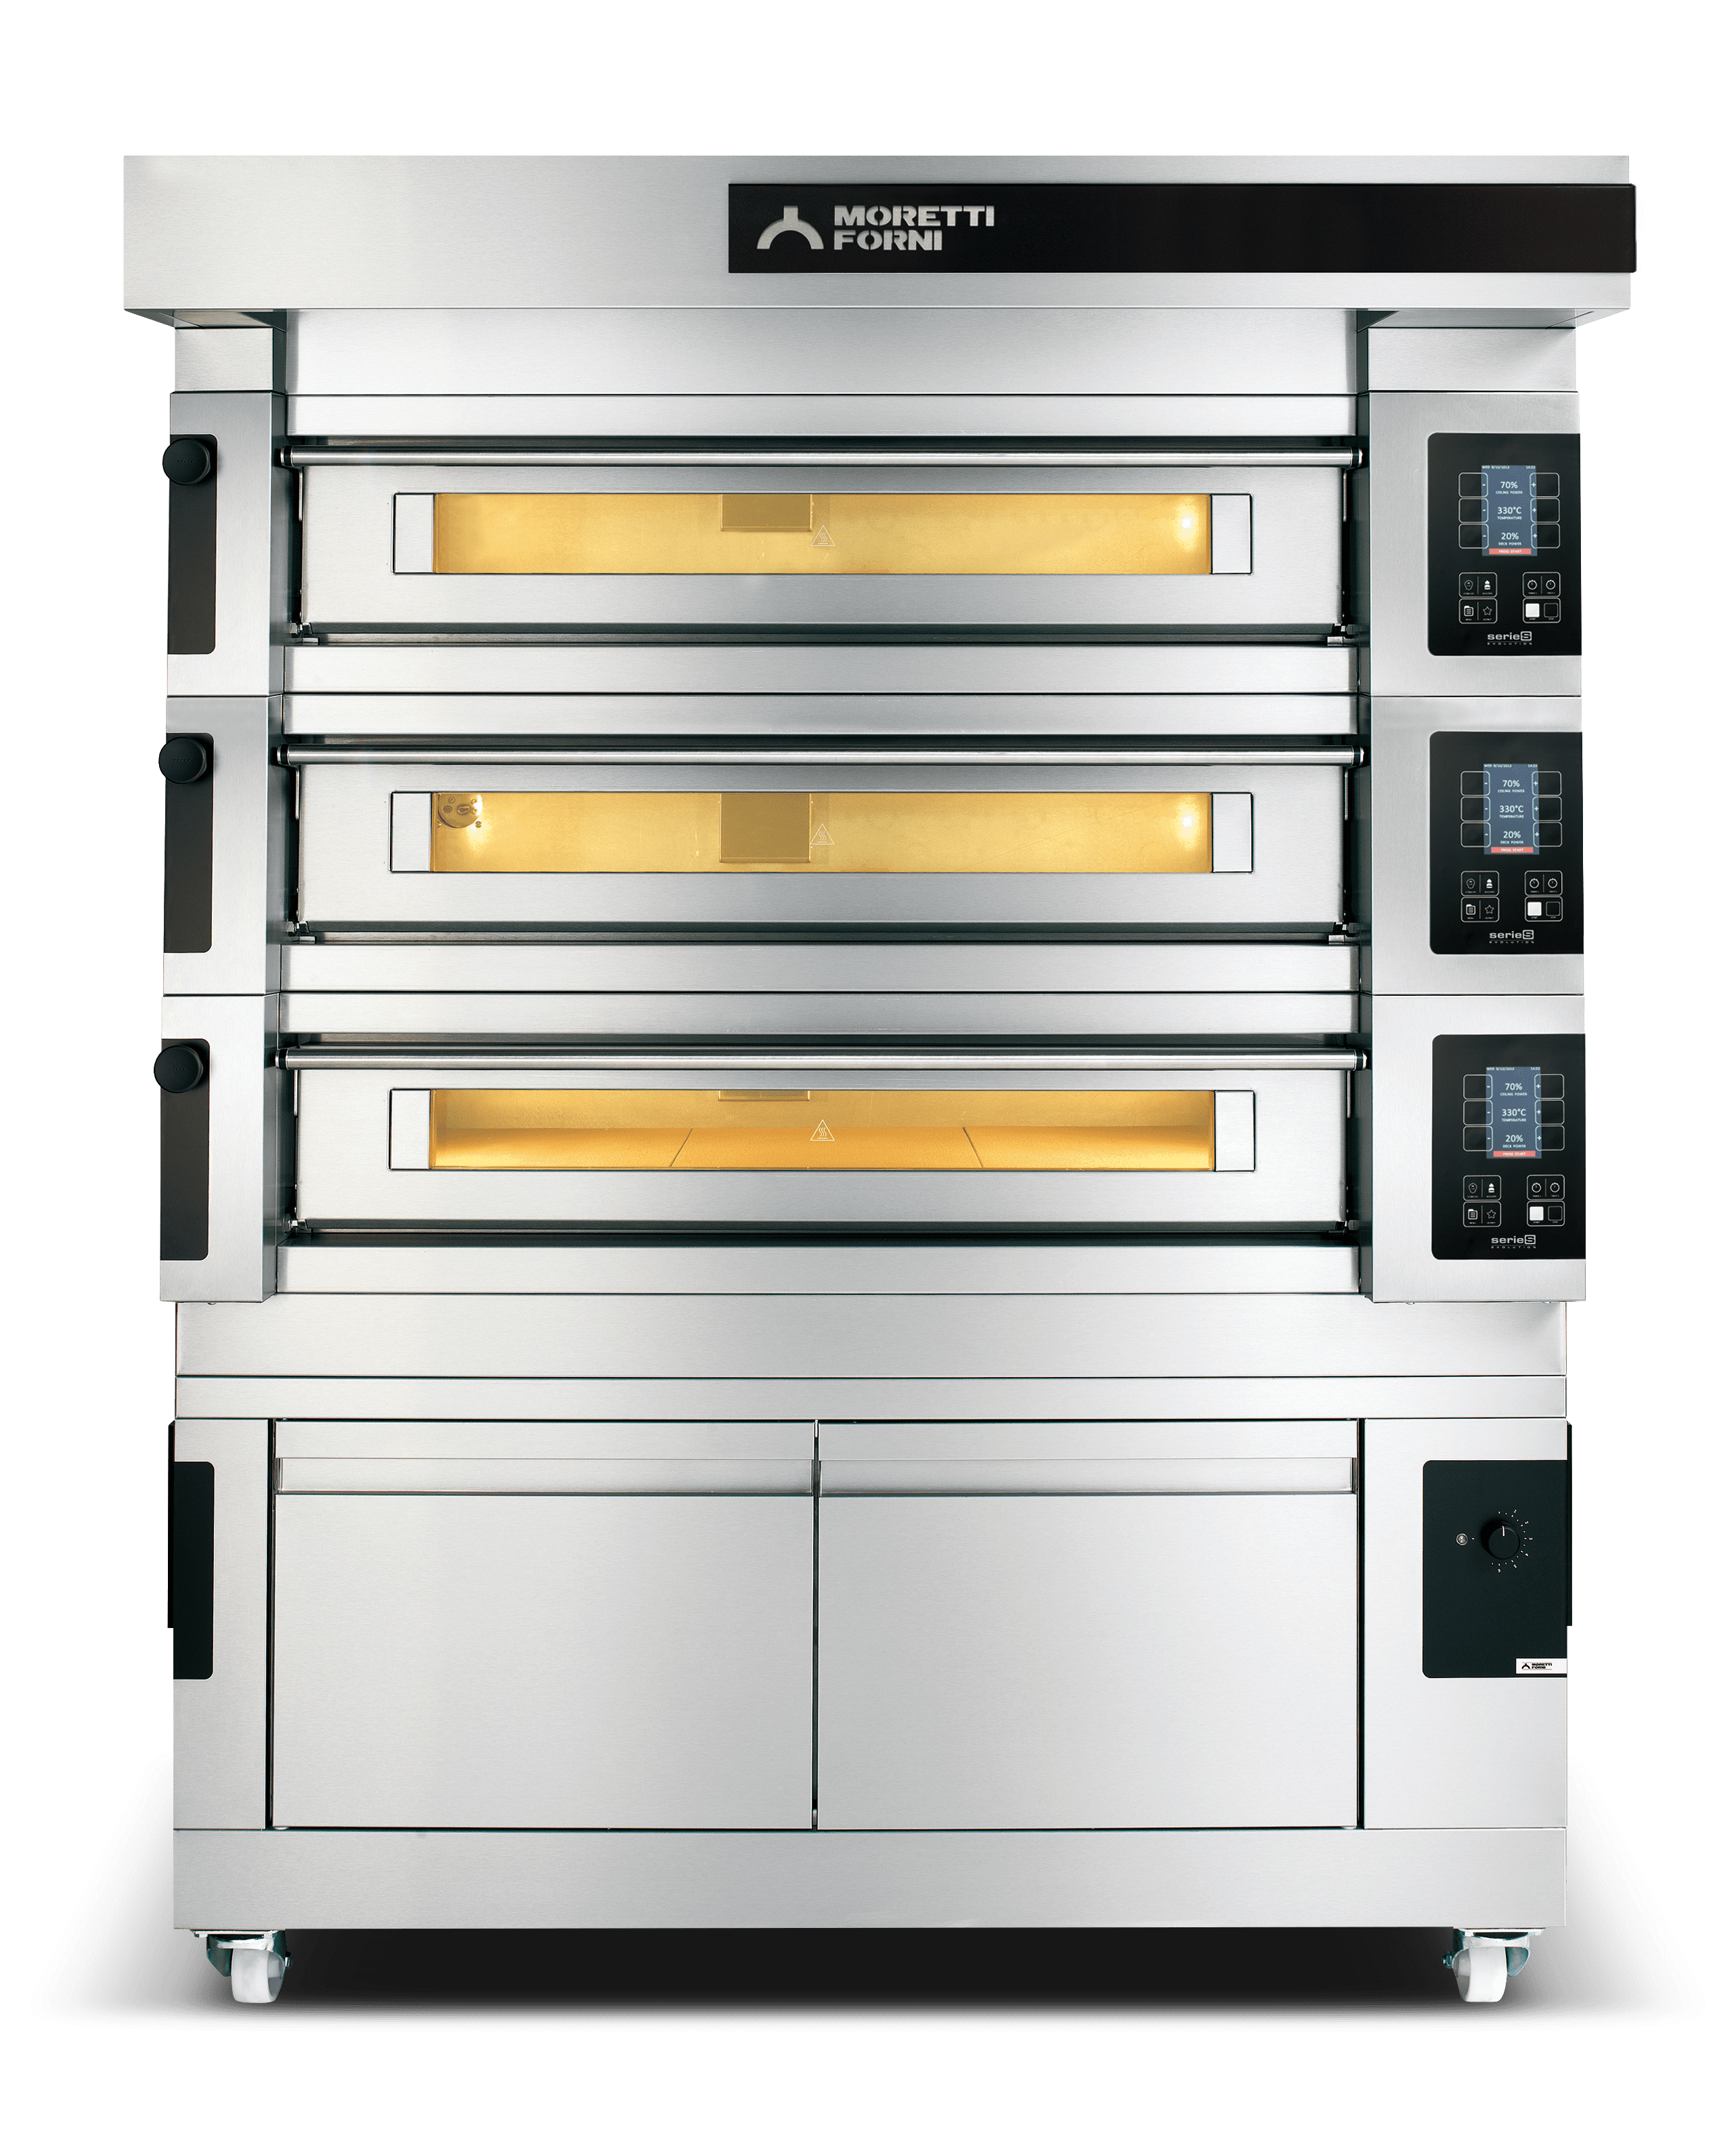 S125E3 - Serie S modular Electric Pizza oven 48-3/4"x49-1/2"x6-1/4" (Chamber)